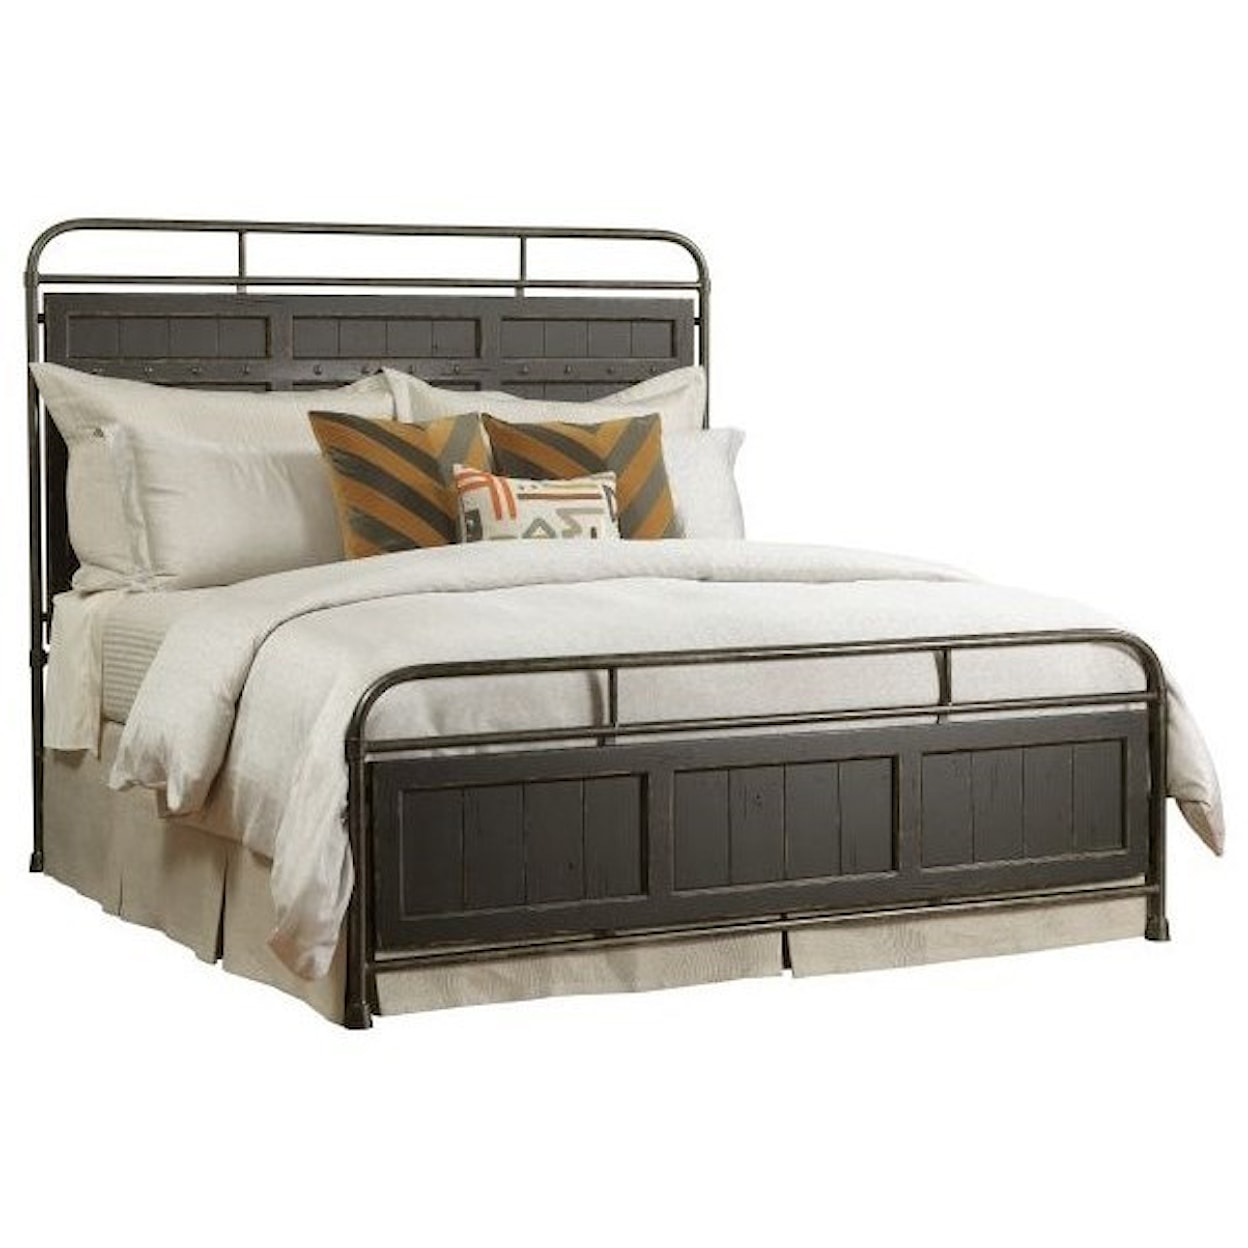 Kincaid Furniture Mill House Folsom Queen Metal Bed